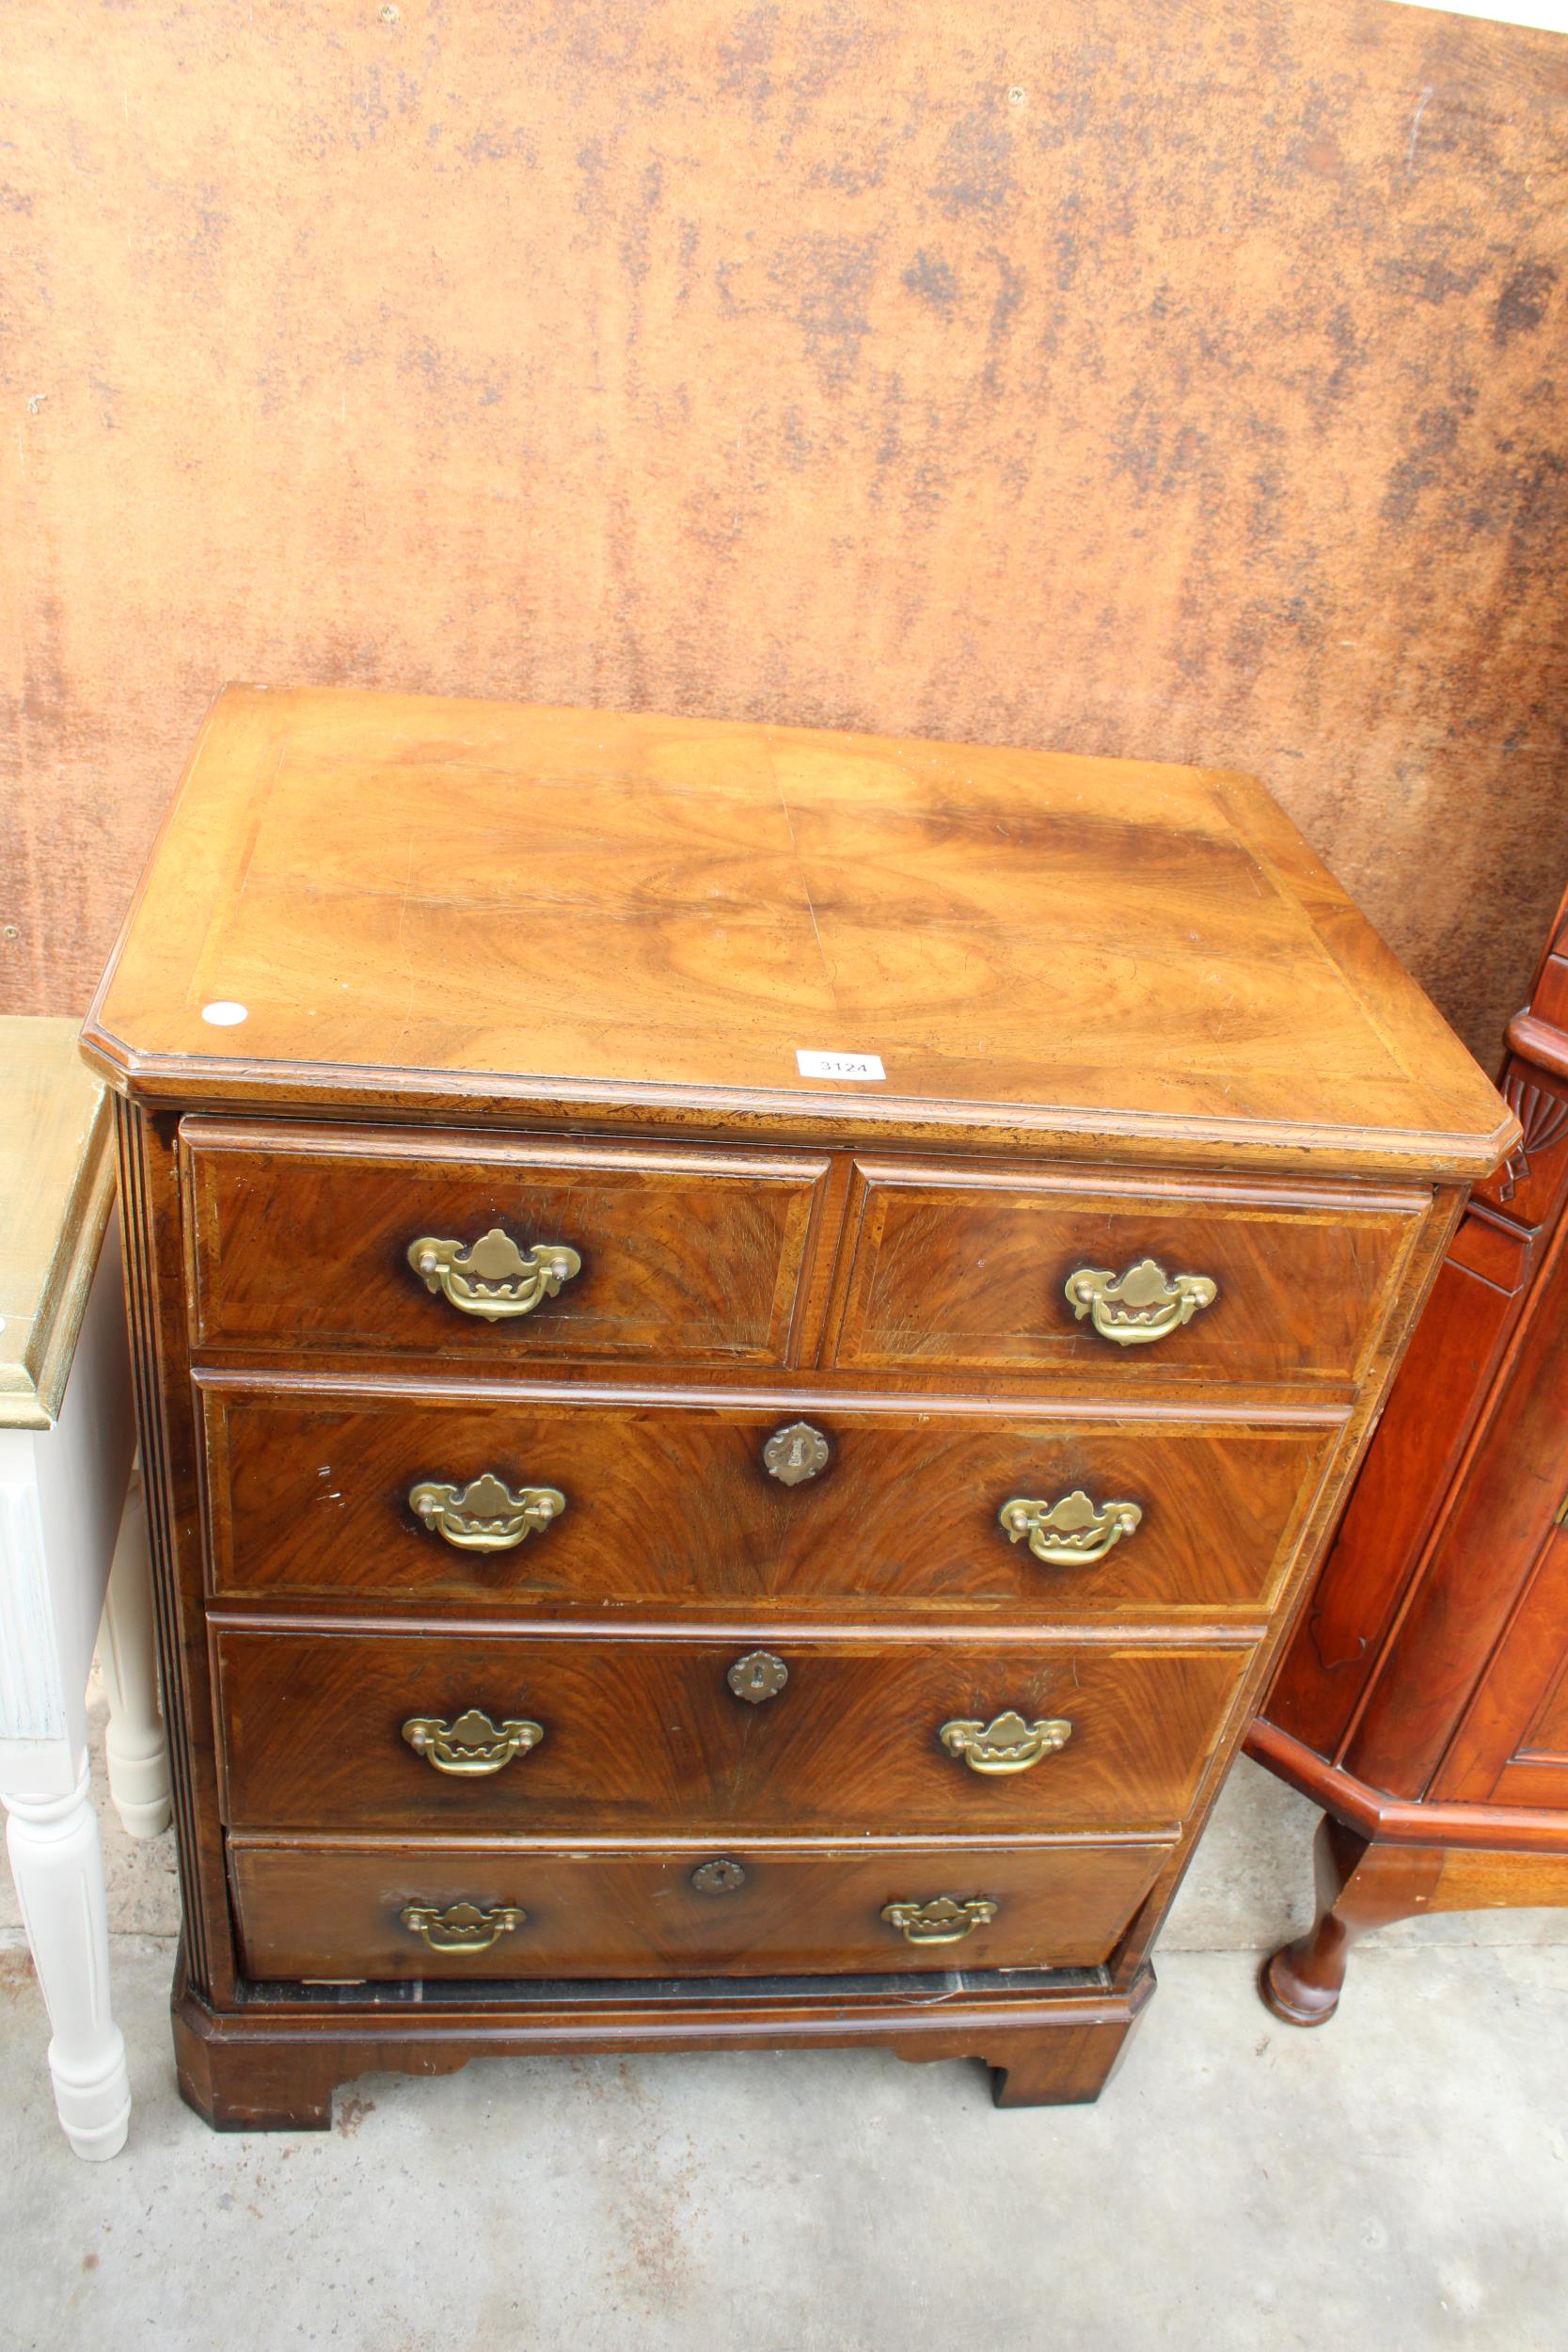 AN ANTIQUE STYLE WALNUT AND CROSS BANDED UNIT IN THE FORM OF A CHEST OF DRAWERS, 27" WIDE